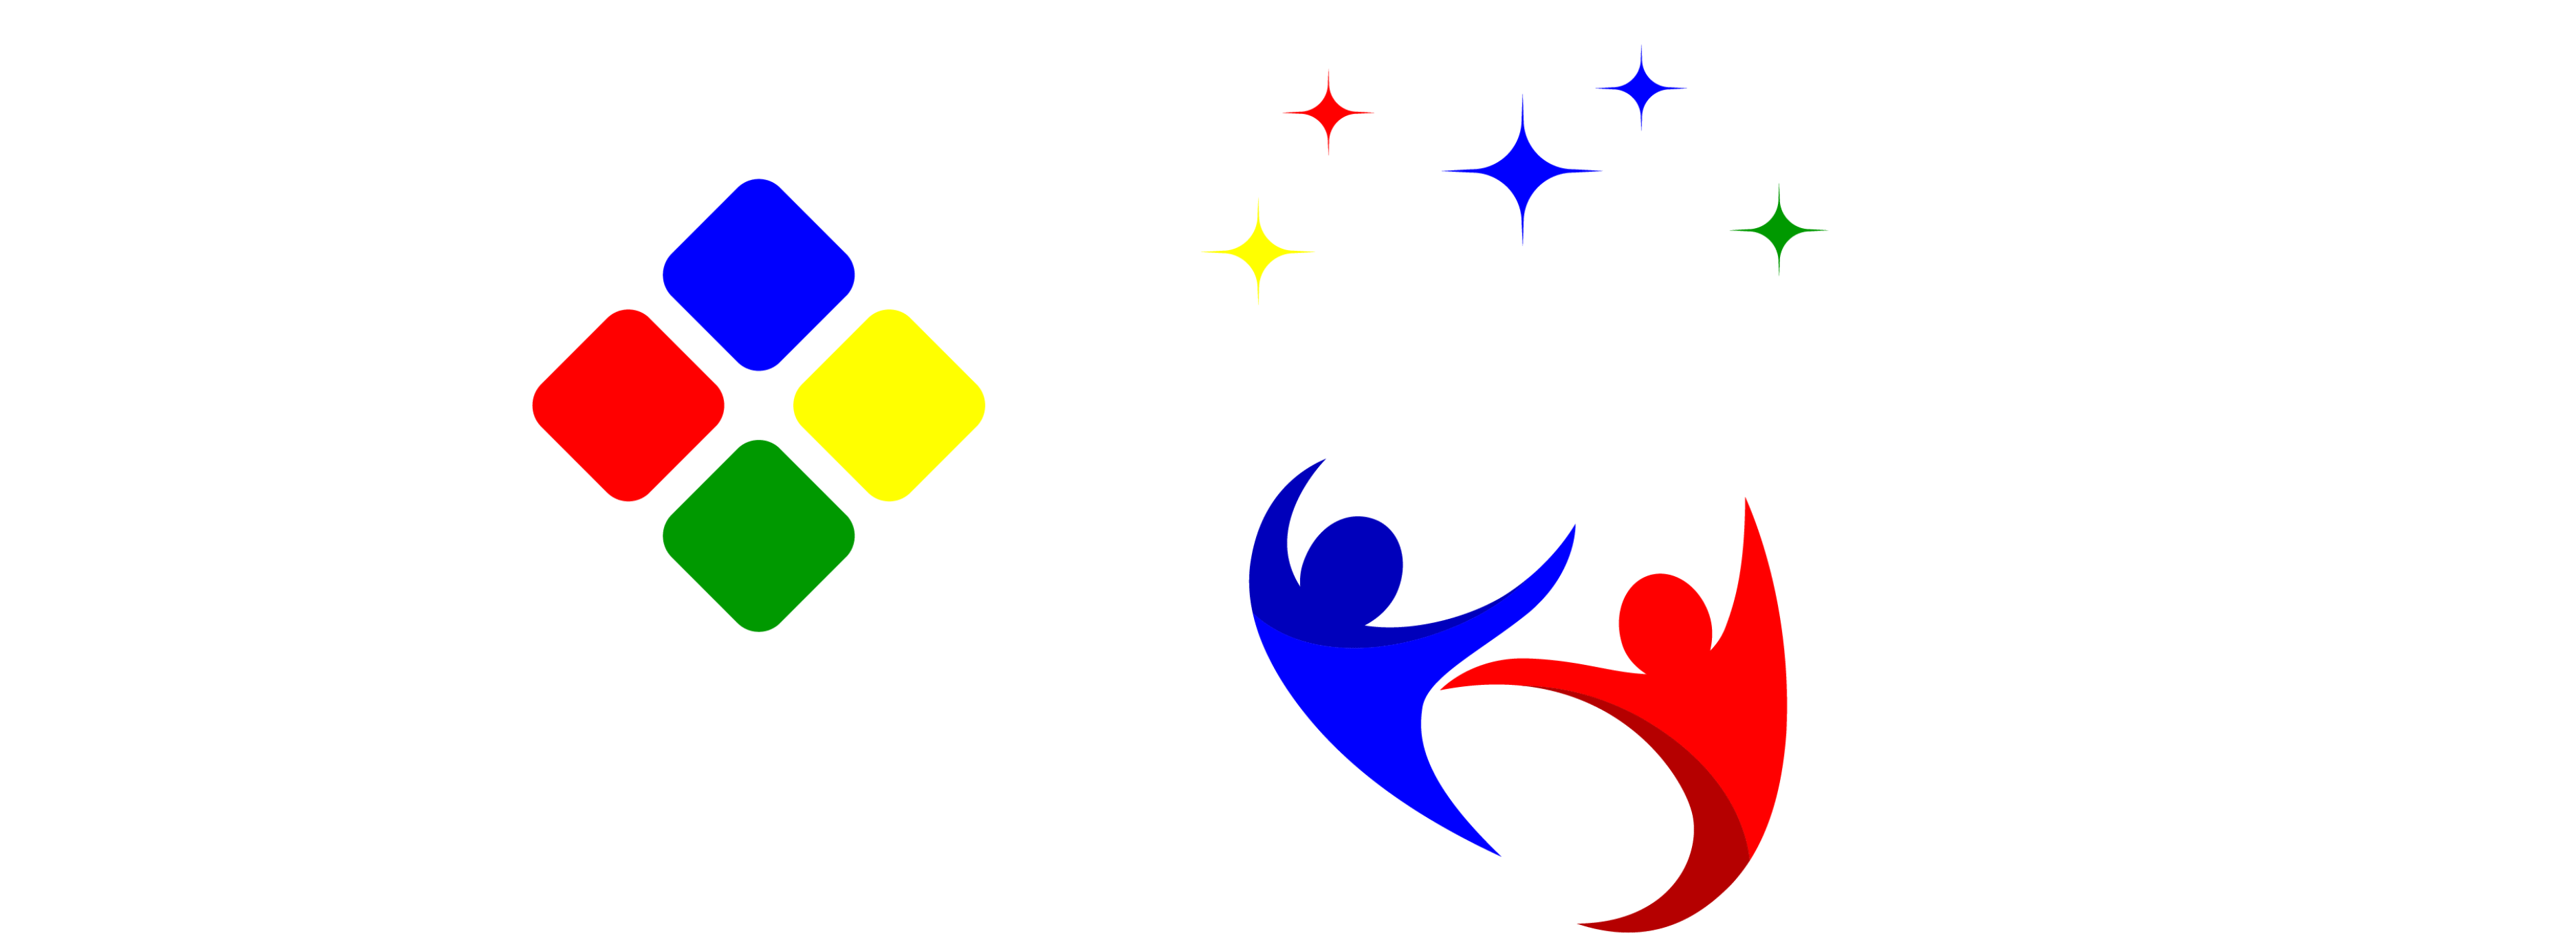 Logo of caribana festival featuring colorful abstract shapes, "caribana" text, stars, and "since 1967" on a green background. OCIDM,io Branding and Digital marketing Hamilton, Toronto, Oakville, Mississauga